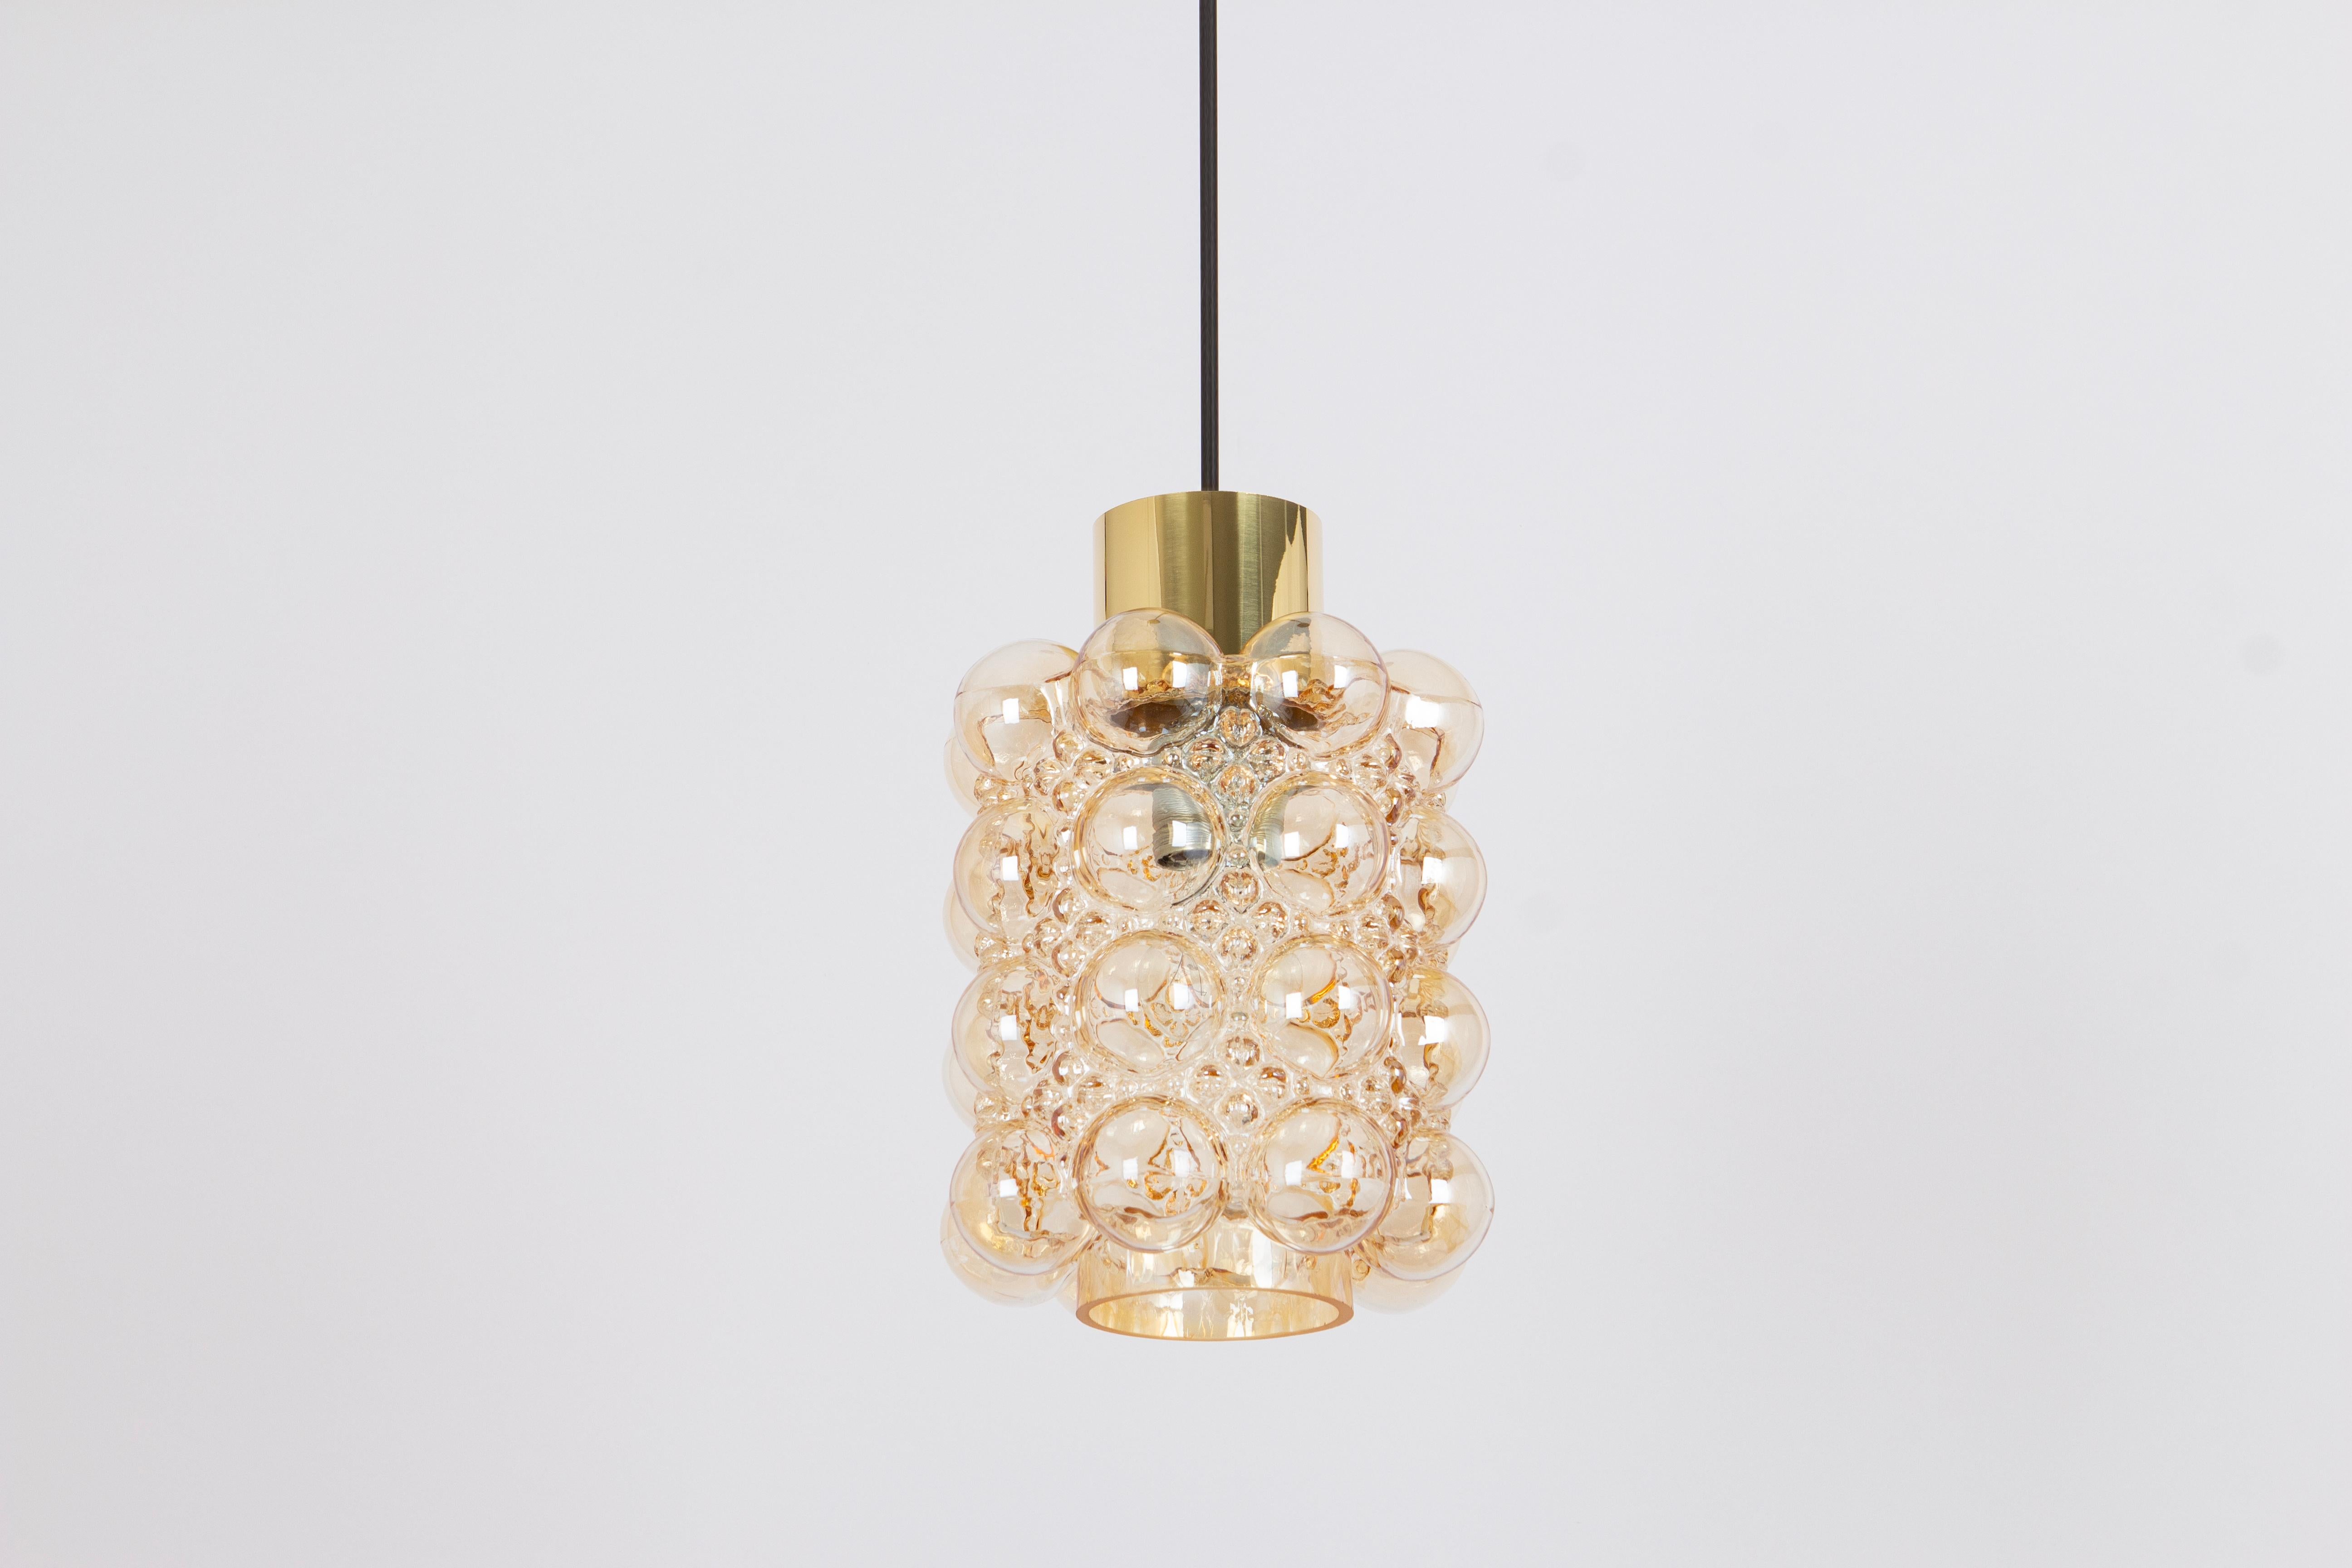 1 of 6 round smoke tone bubble glass pendant designed by Helena Tynell for Limburg, manufactured in Germany, circa 1970s.

Handcrafted with precision by skilled artisans at Limburg Lighting, this pendant light is a true testament to the brand's